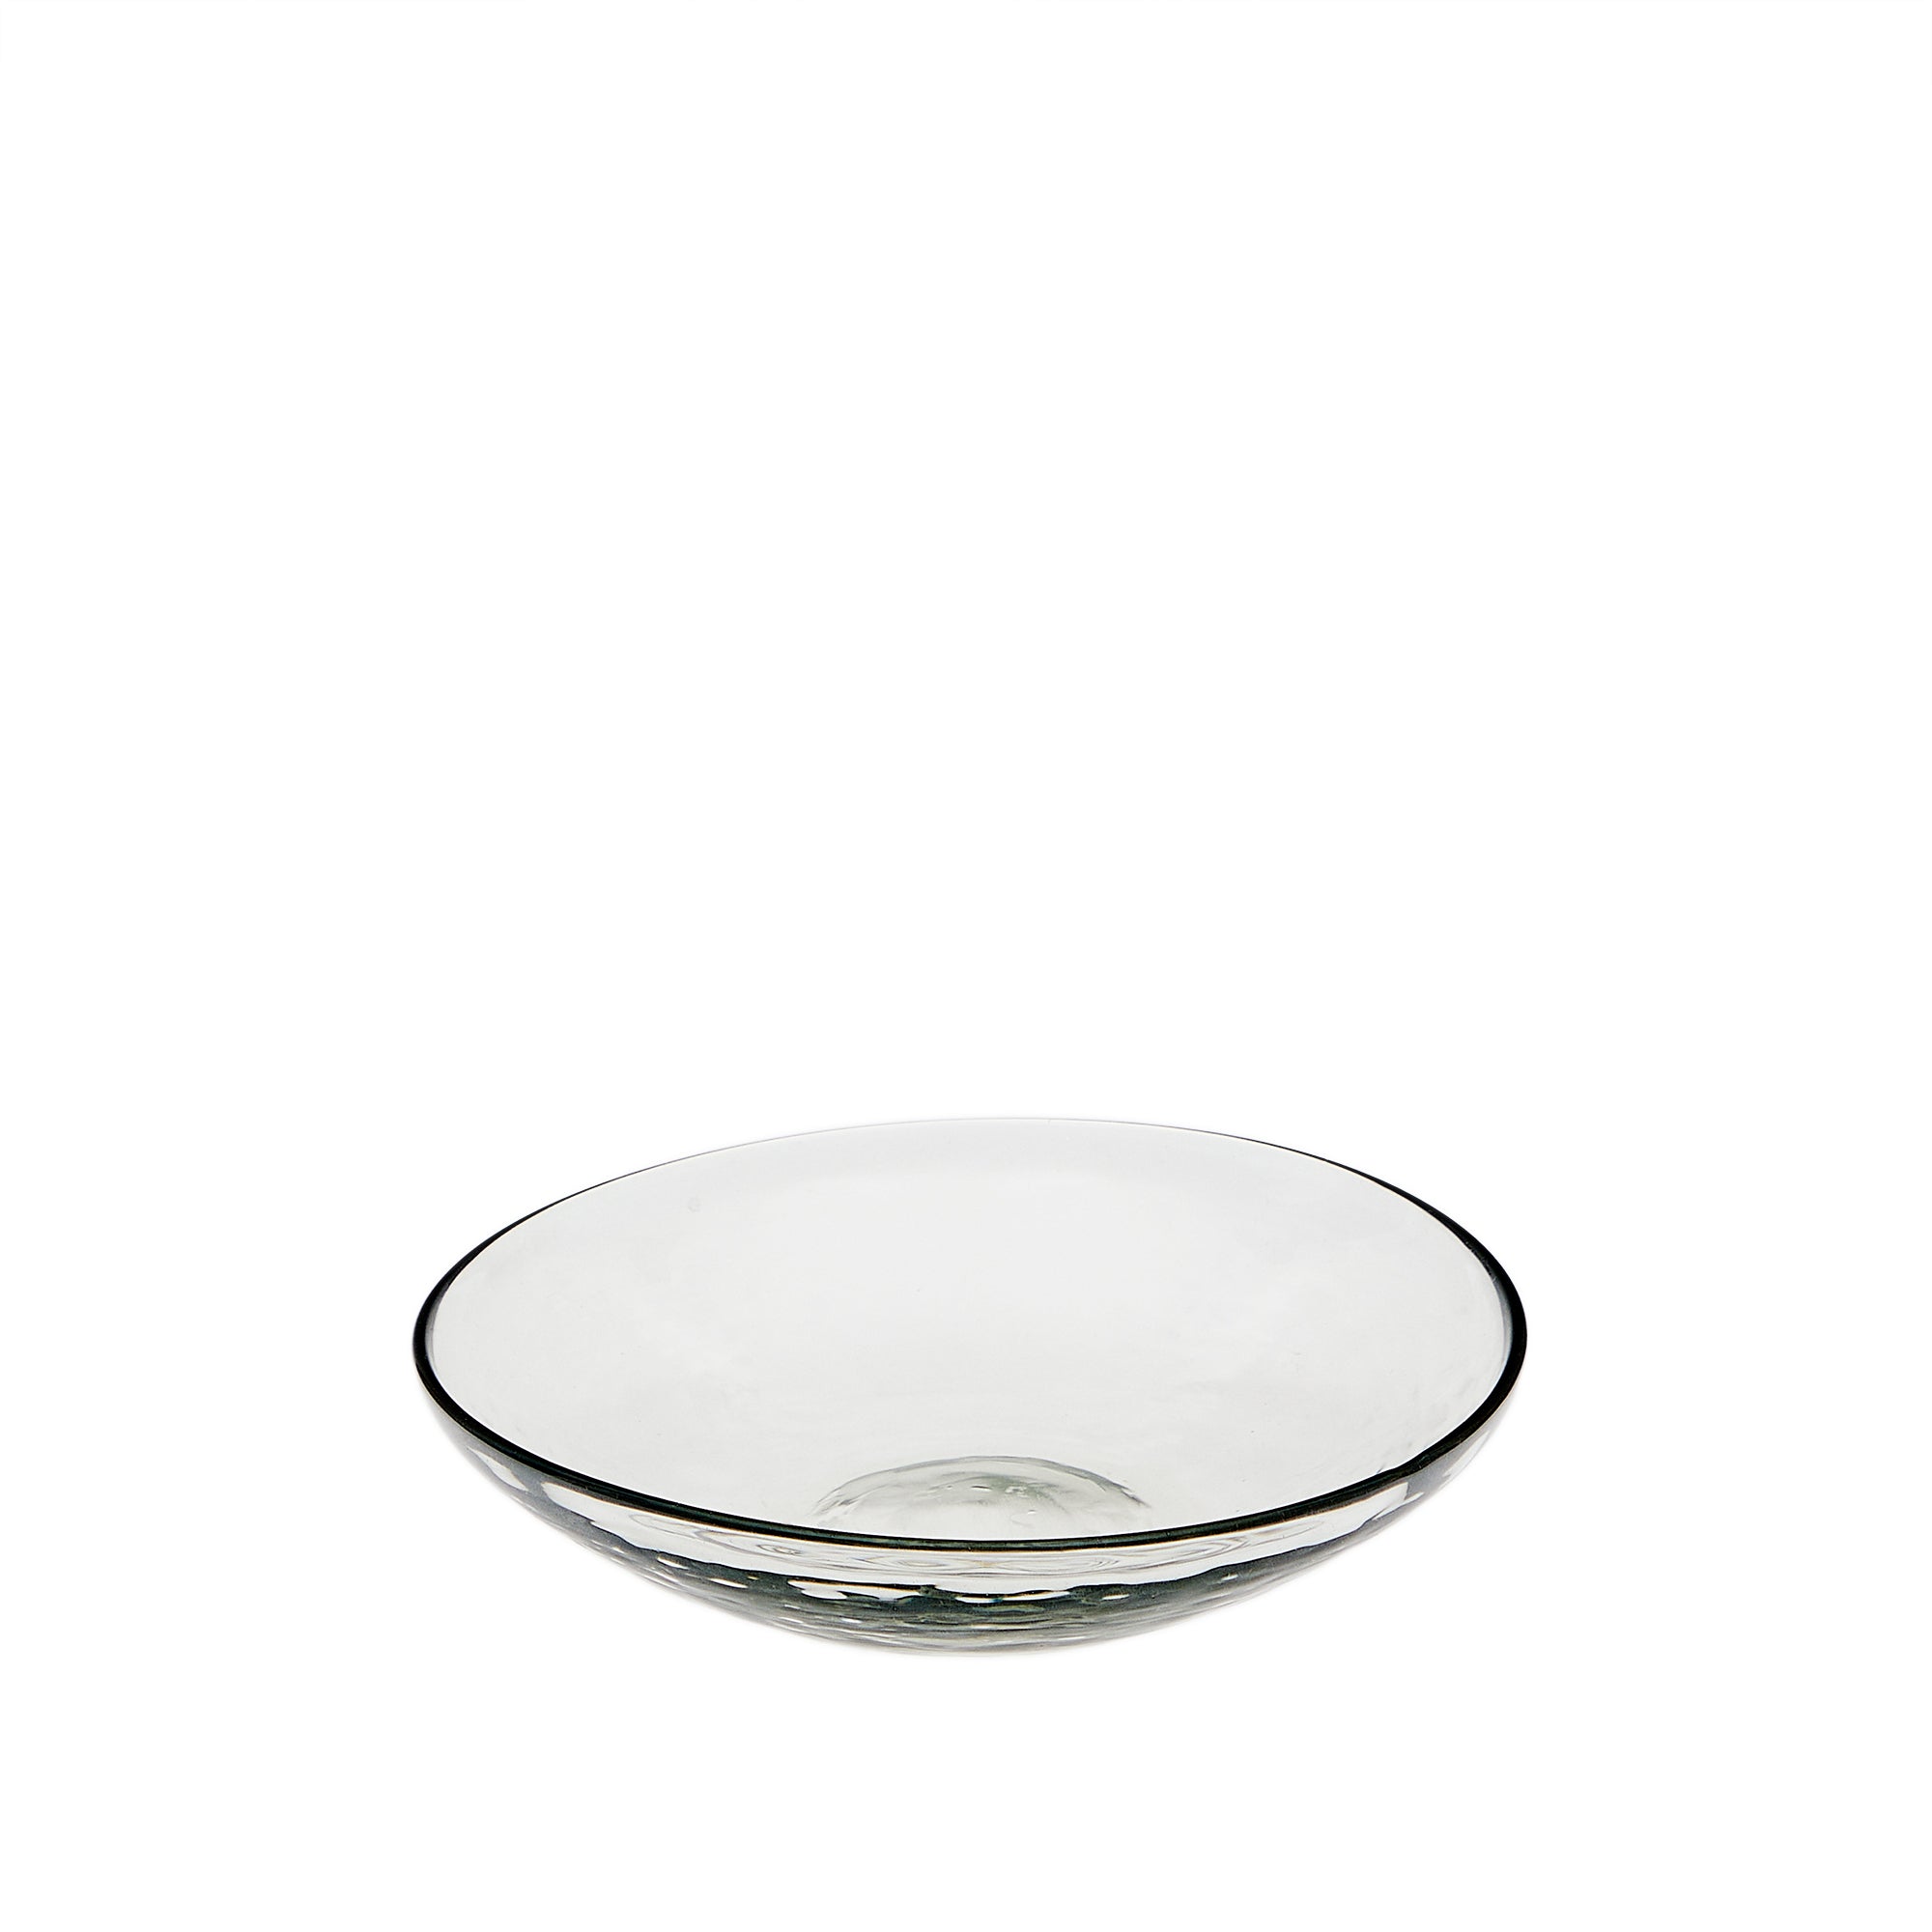 Silitia small bowl, made of transparent recycled glass